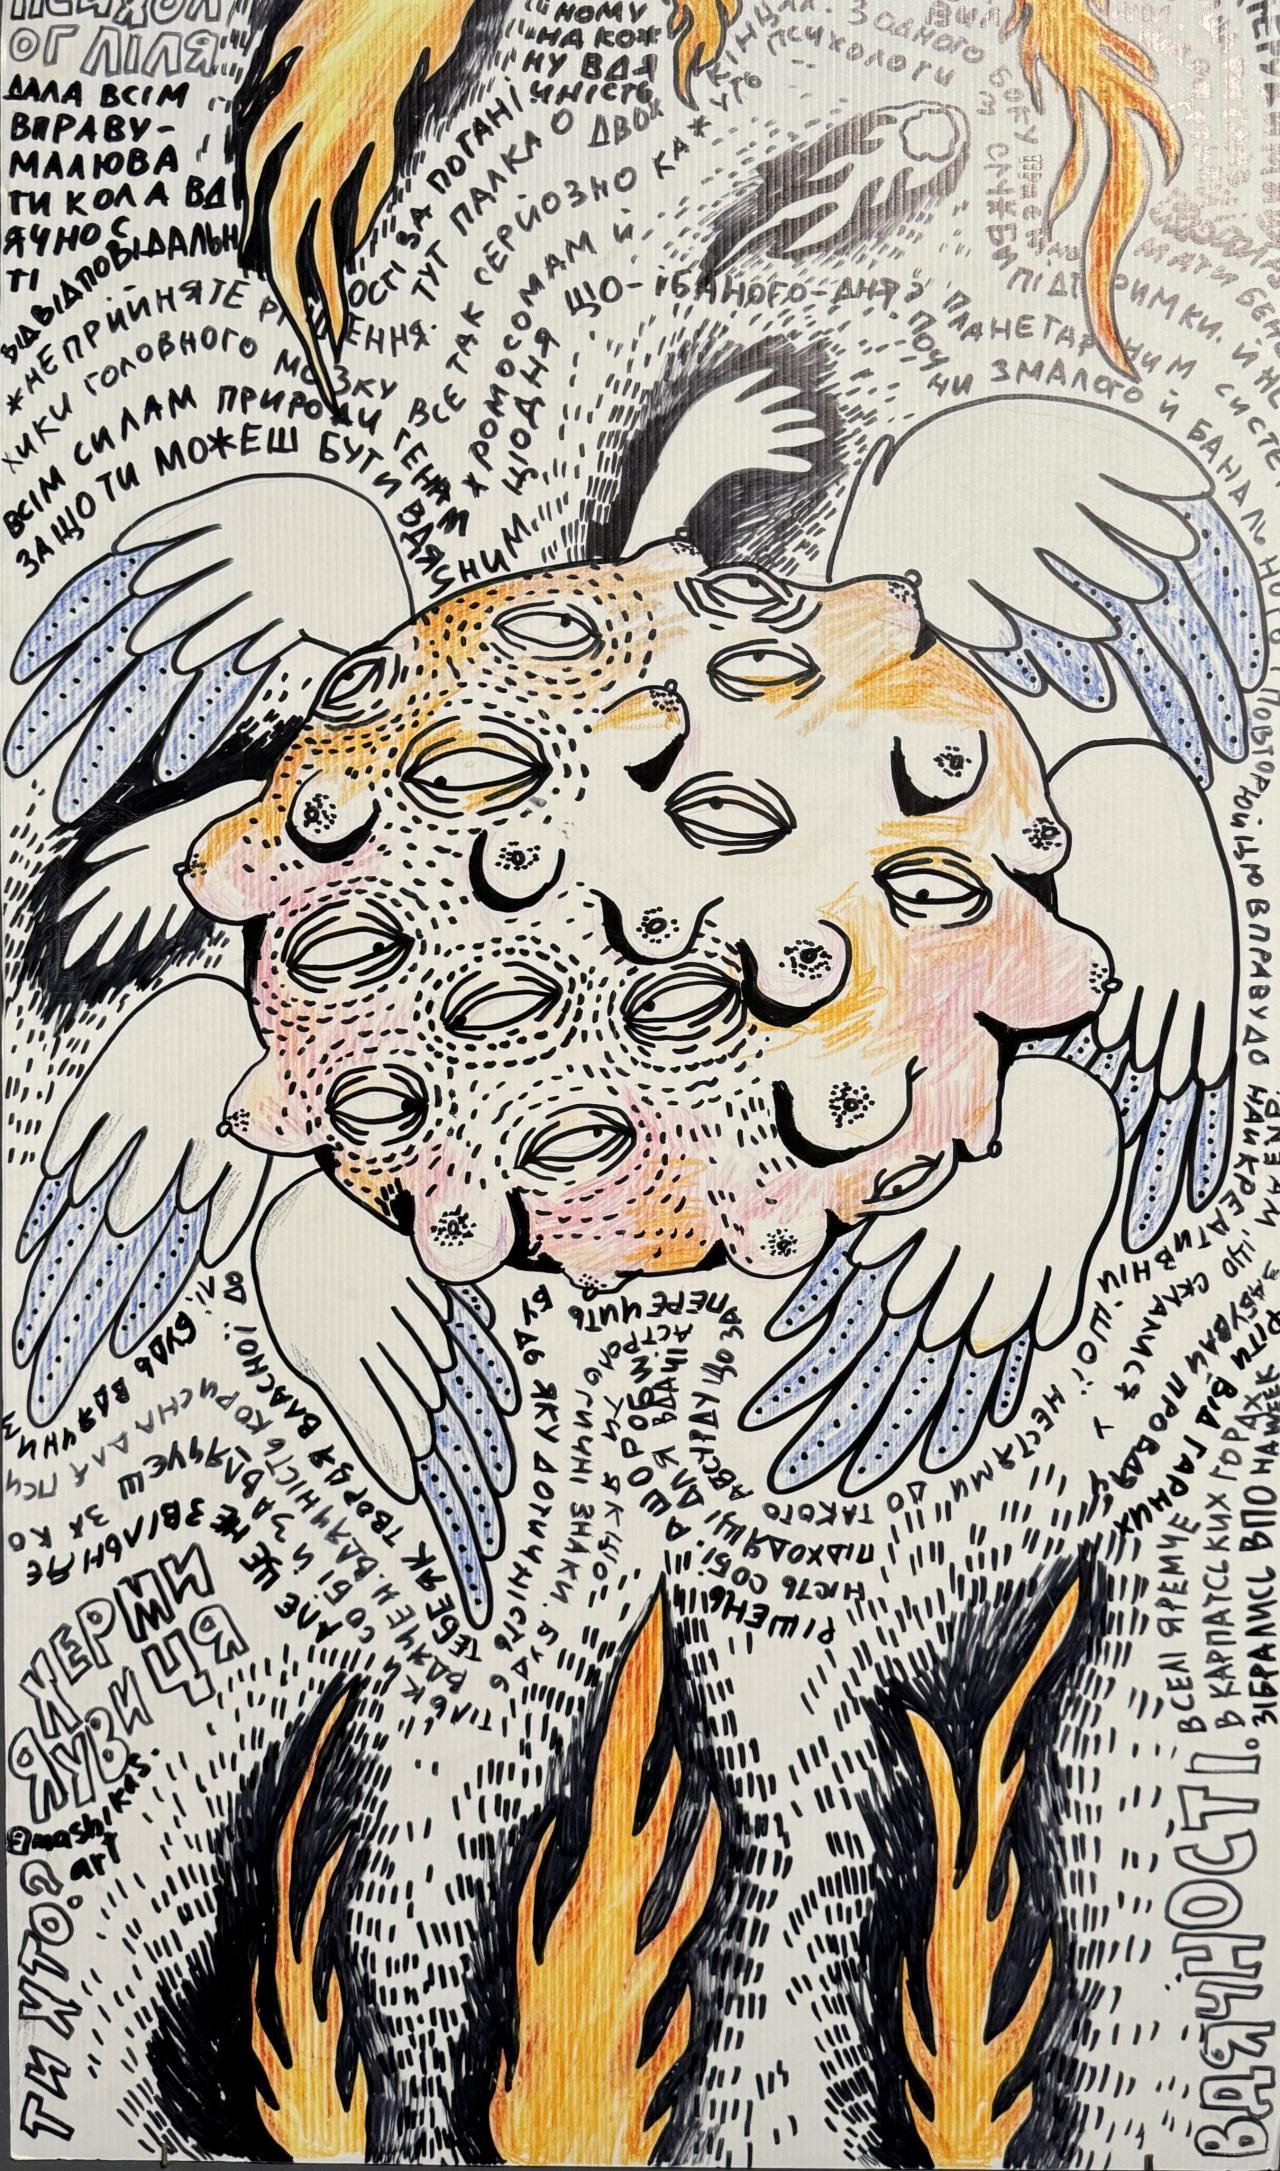 In the middle, on a white background, there is a center of painted eyes surrounded by wings, with flames painted on the edges.